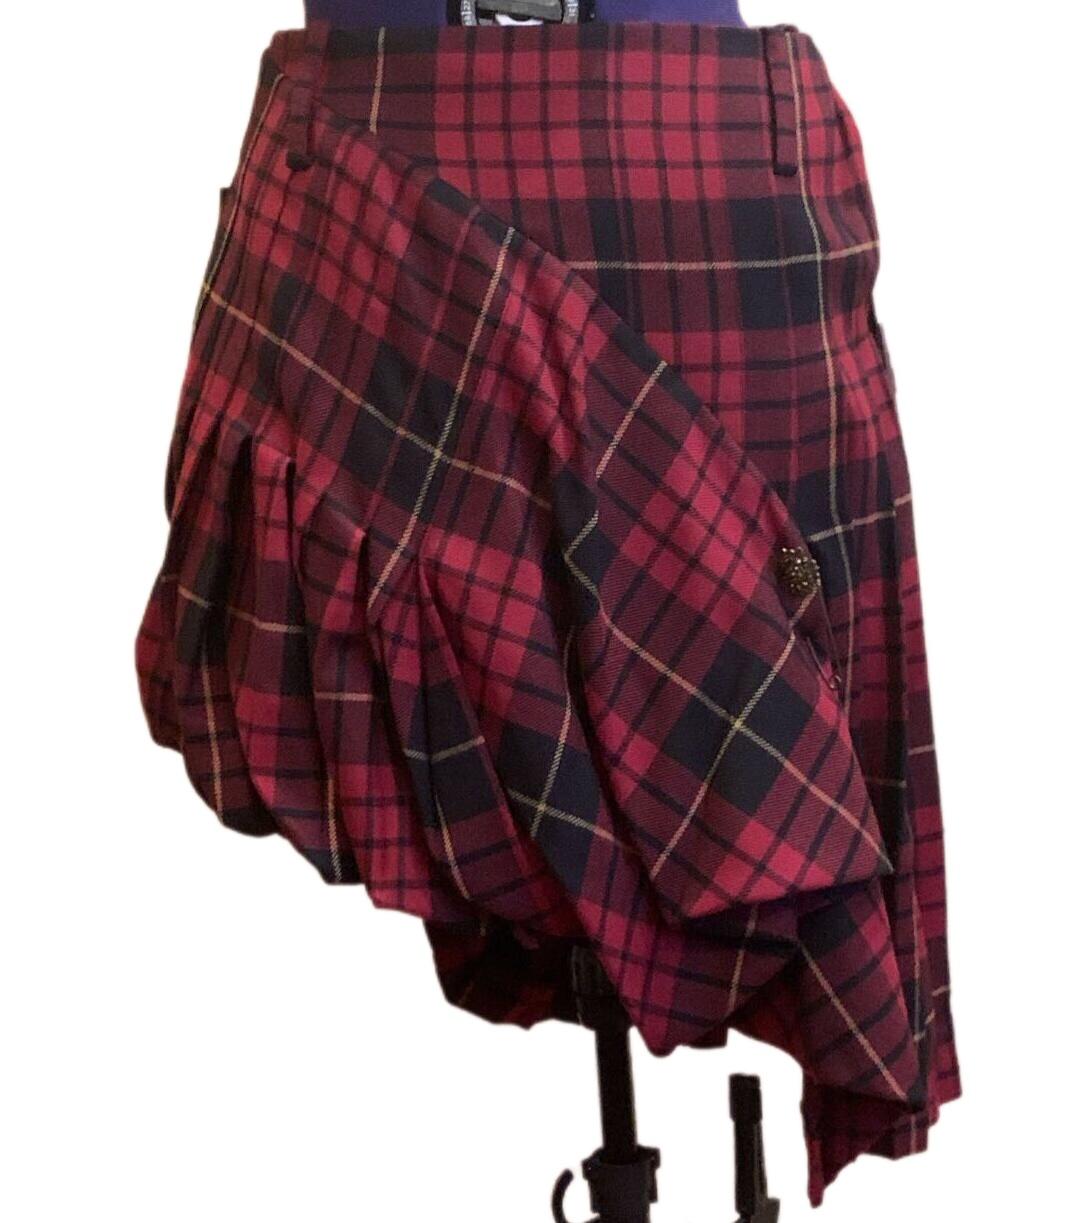 Iconic 2006 Look#27 Alexander McQueen Tartan Print Wool Skirt with Pin
Highly collectible. Museum grade! 
Size: IT - 44, US - 8
Made in Italy
Excellent condition

New with tags